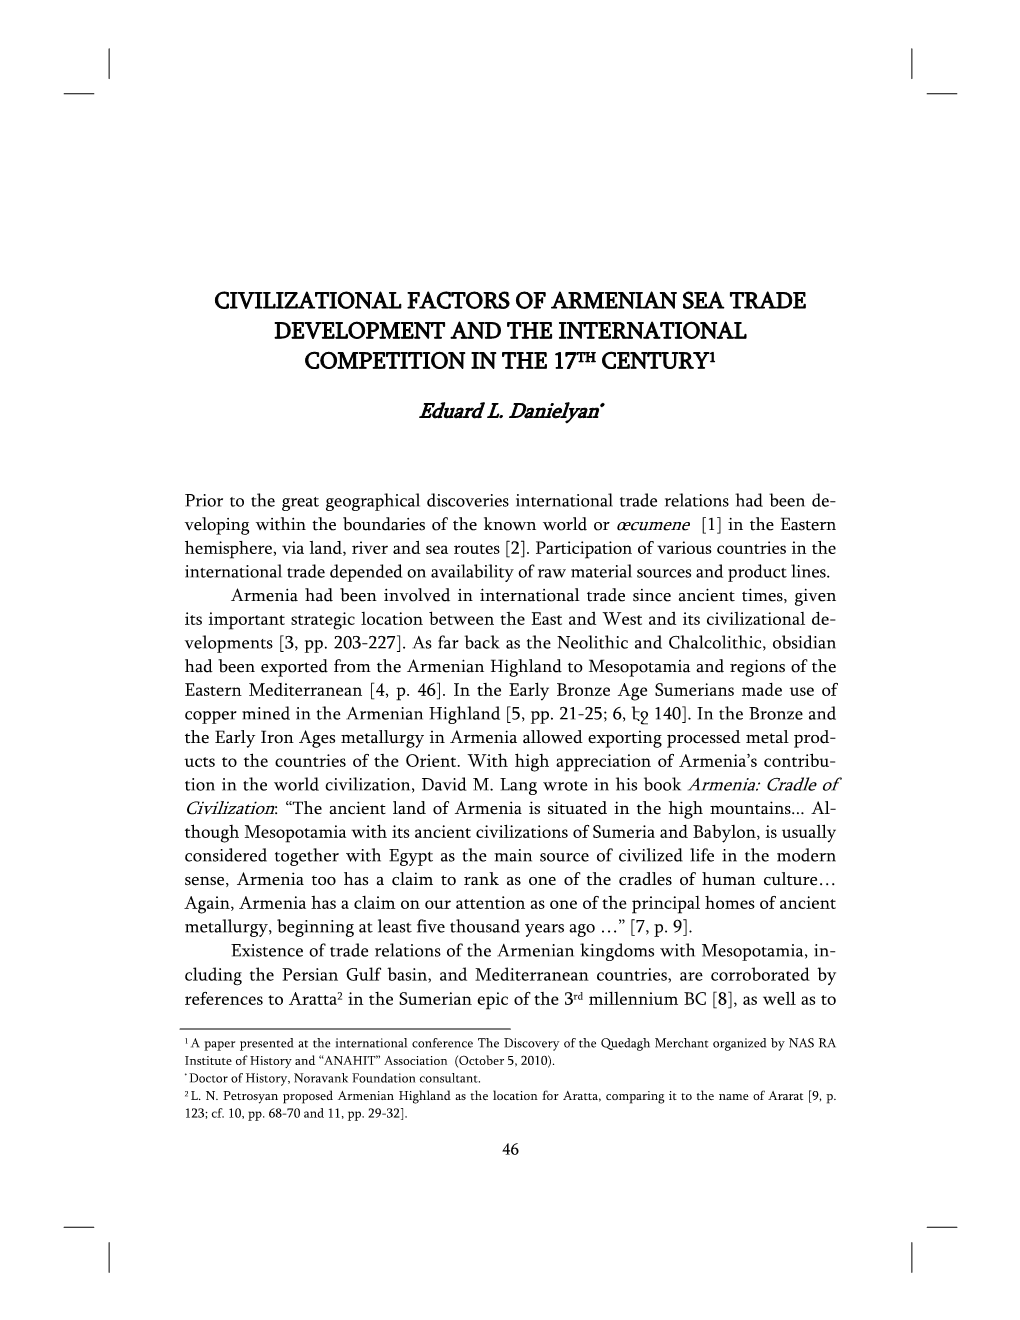 Civilizational Factors of Armenian Sea Trade Development and the International Competition in the 17Th Century1